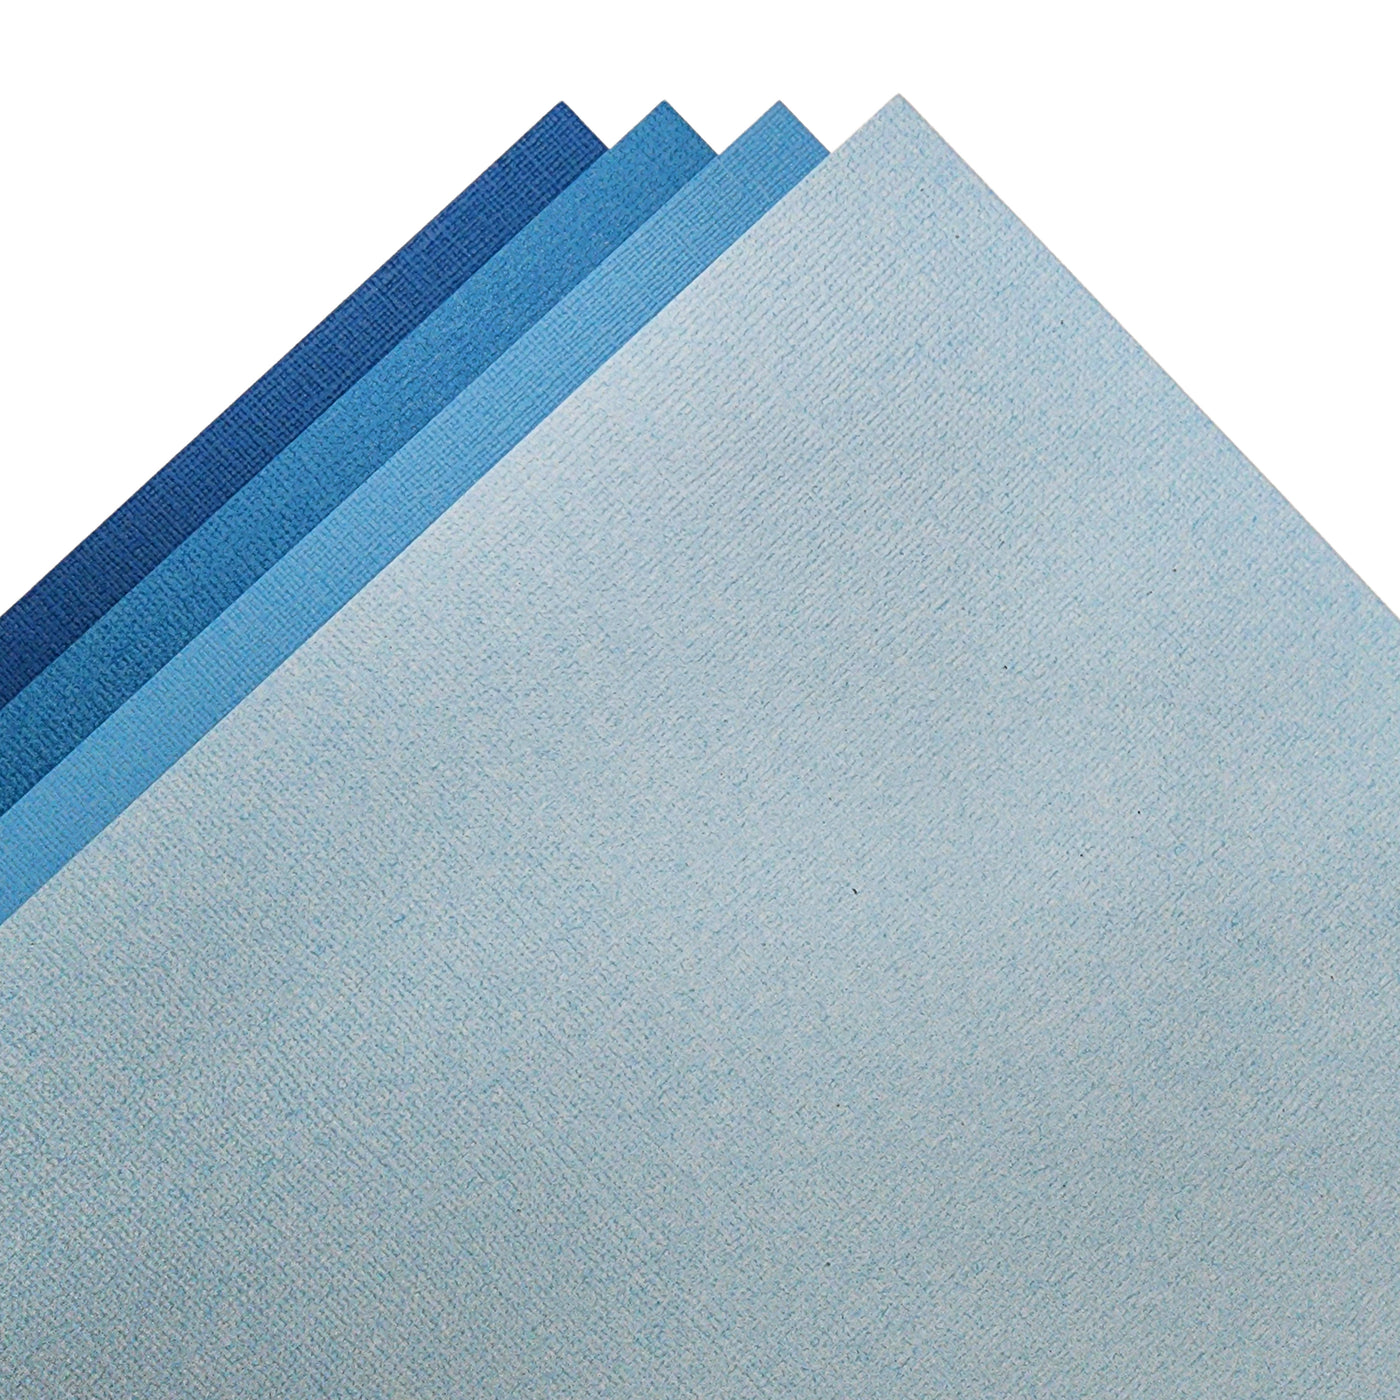 The Bright Blue monochromatic assortment includes three (3) each of four (4) shades of blue colors of Bazzill textured cardstock.